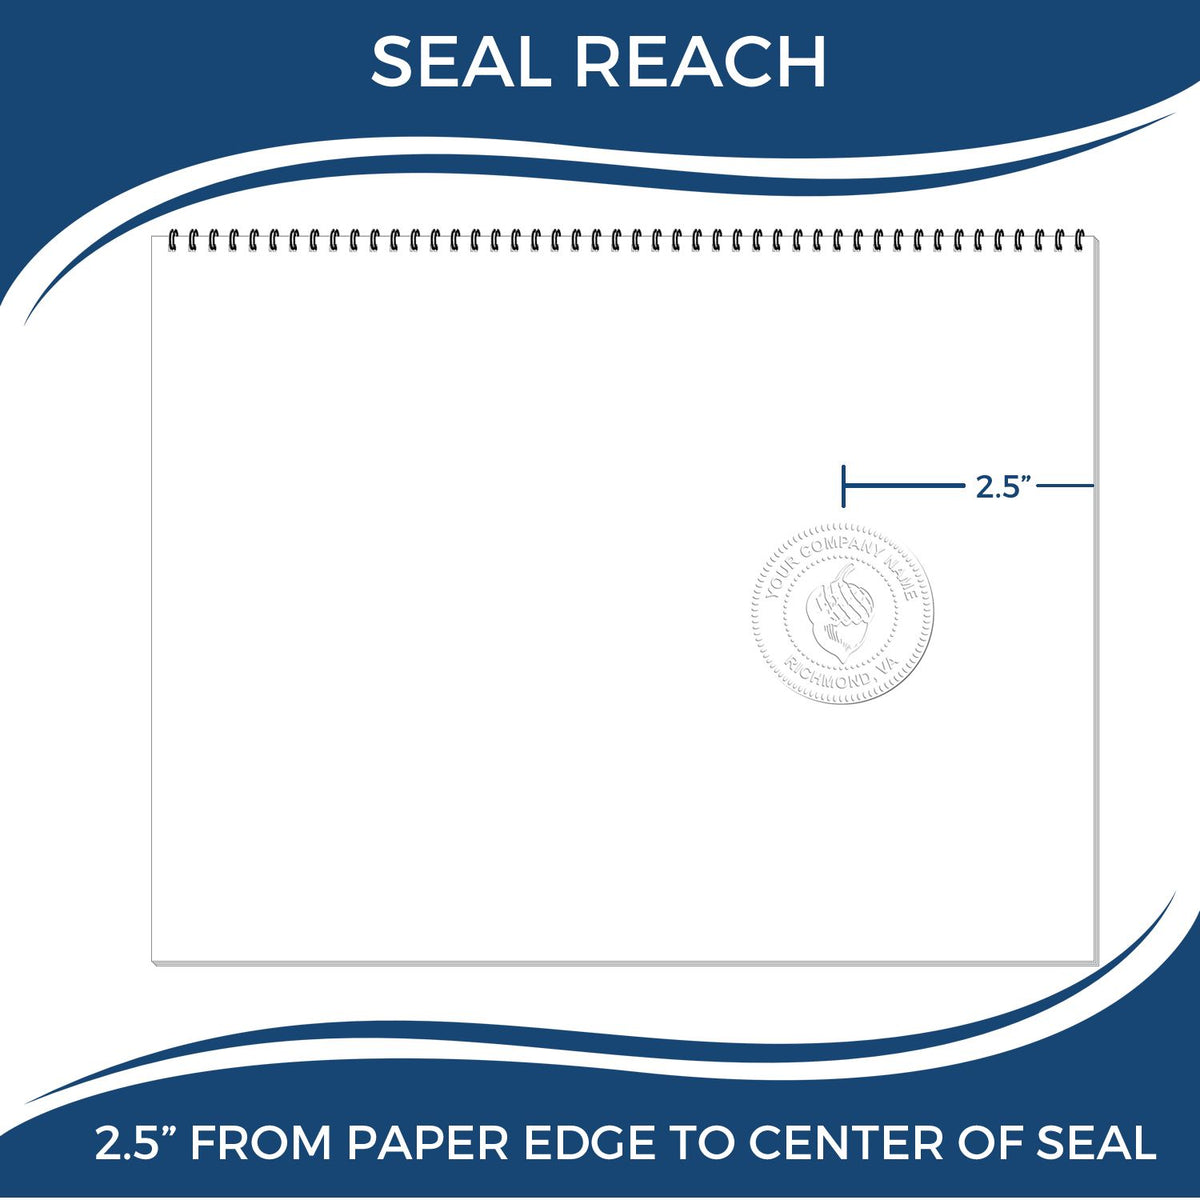 An infographic showing the seal reach which is represented by a ruler and a miniature seal image of the State of Pennsylvania Long Reach Architectural Embossing Seal